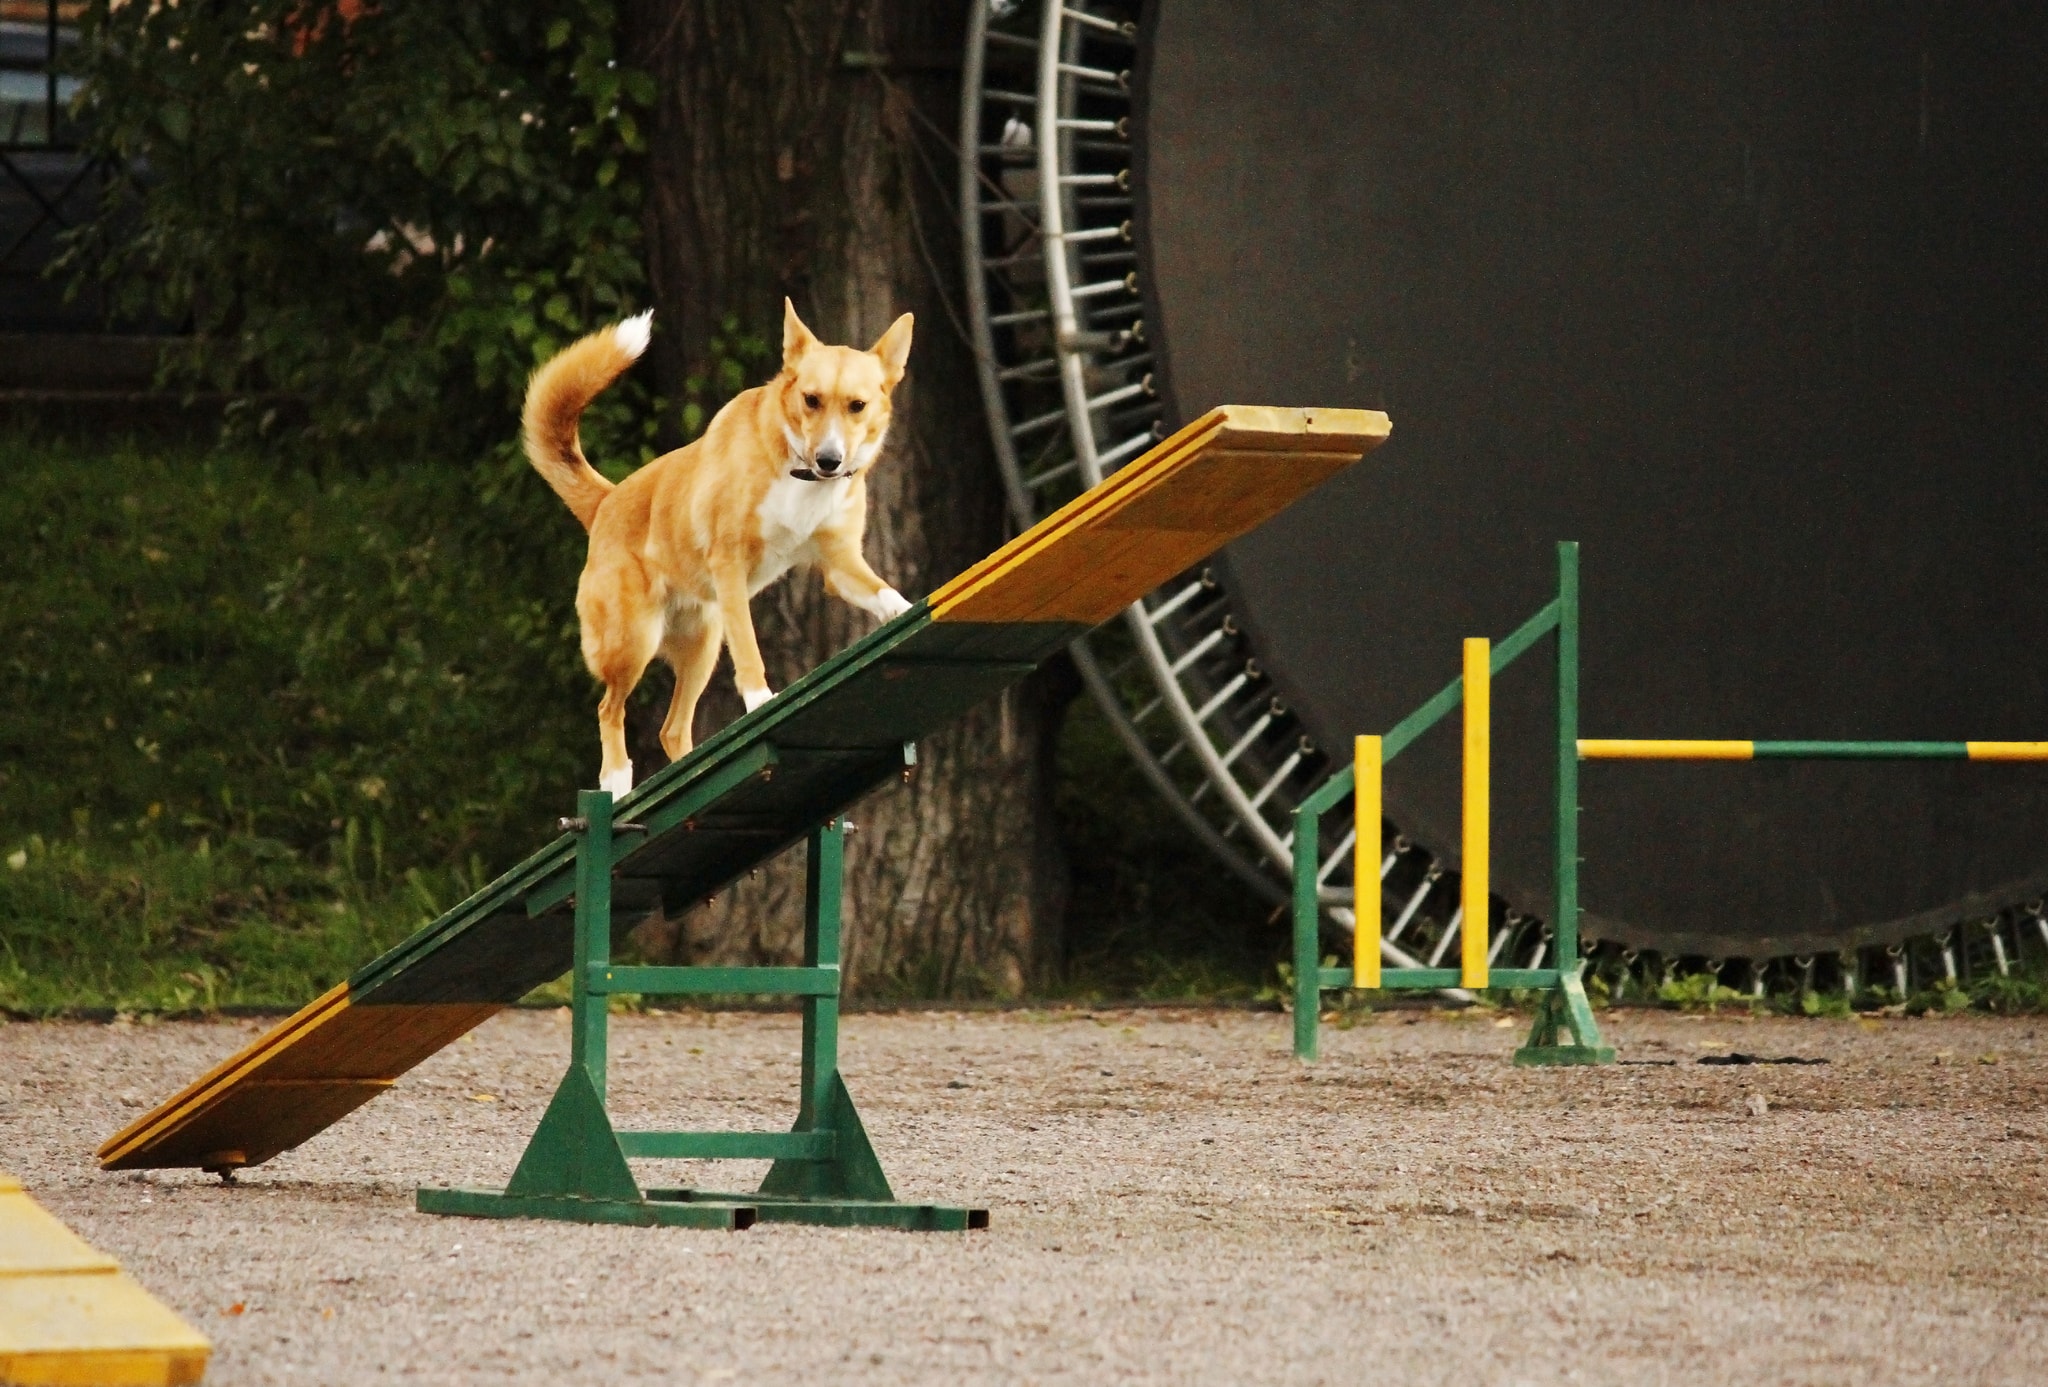 10 Questions to Ask Before Taking a Dog Agility Training Class